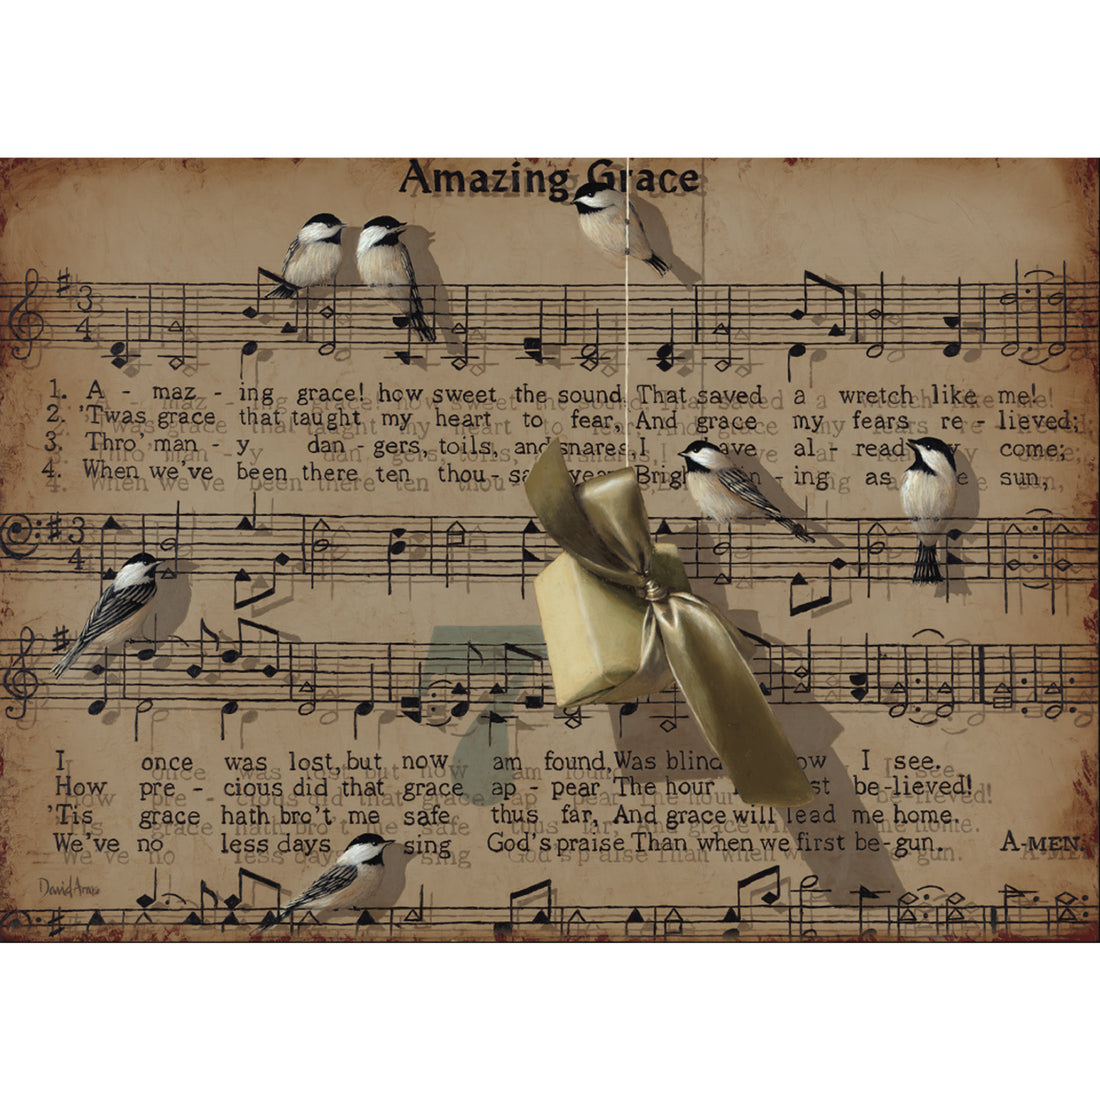 A design featuring tan, aged sheet music for &quot;Amazing Grace&quot; in the background, with several small chickadee birds sitting on the music bars, with a small wrapped gift hanging by a thread in the foreground.